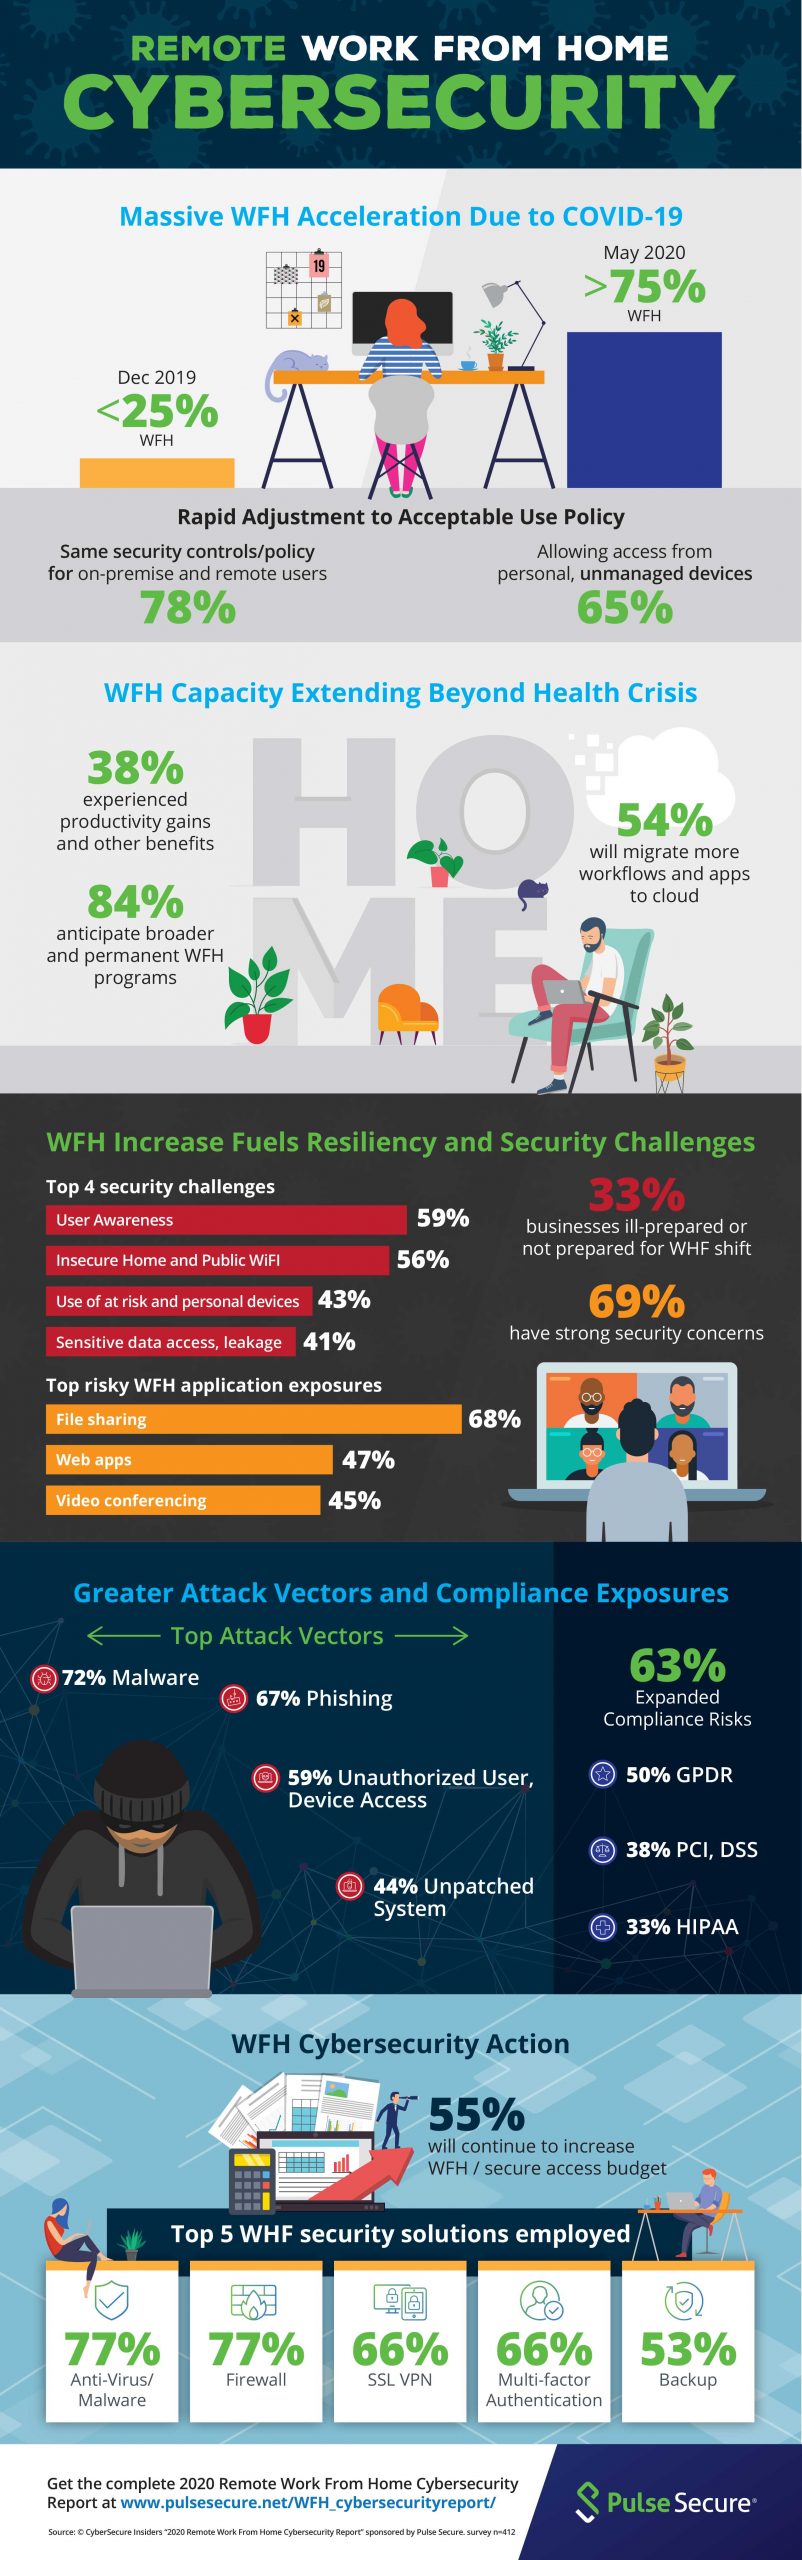 2020 Remote Work From Home Report Infographic Pulse Secure CybersecurityInsiders Scaled, Industry Today